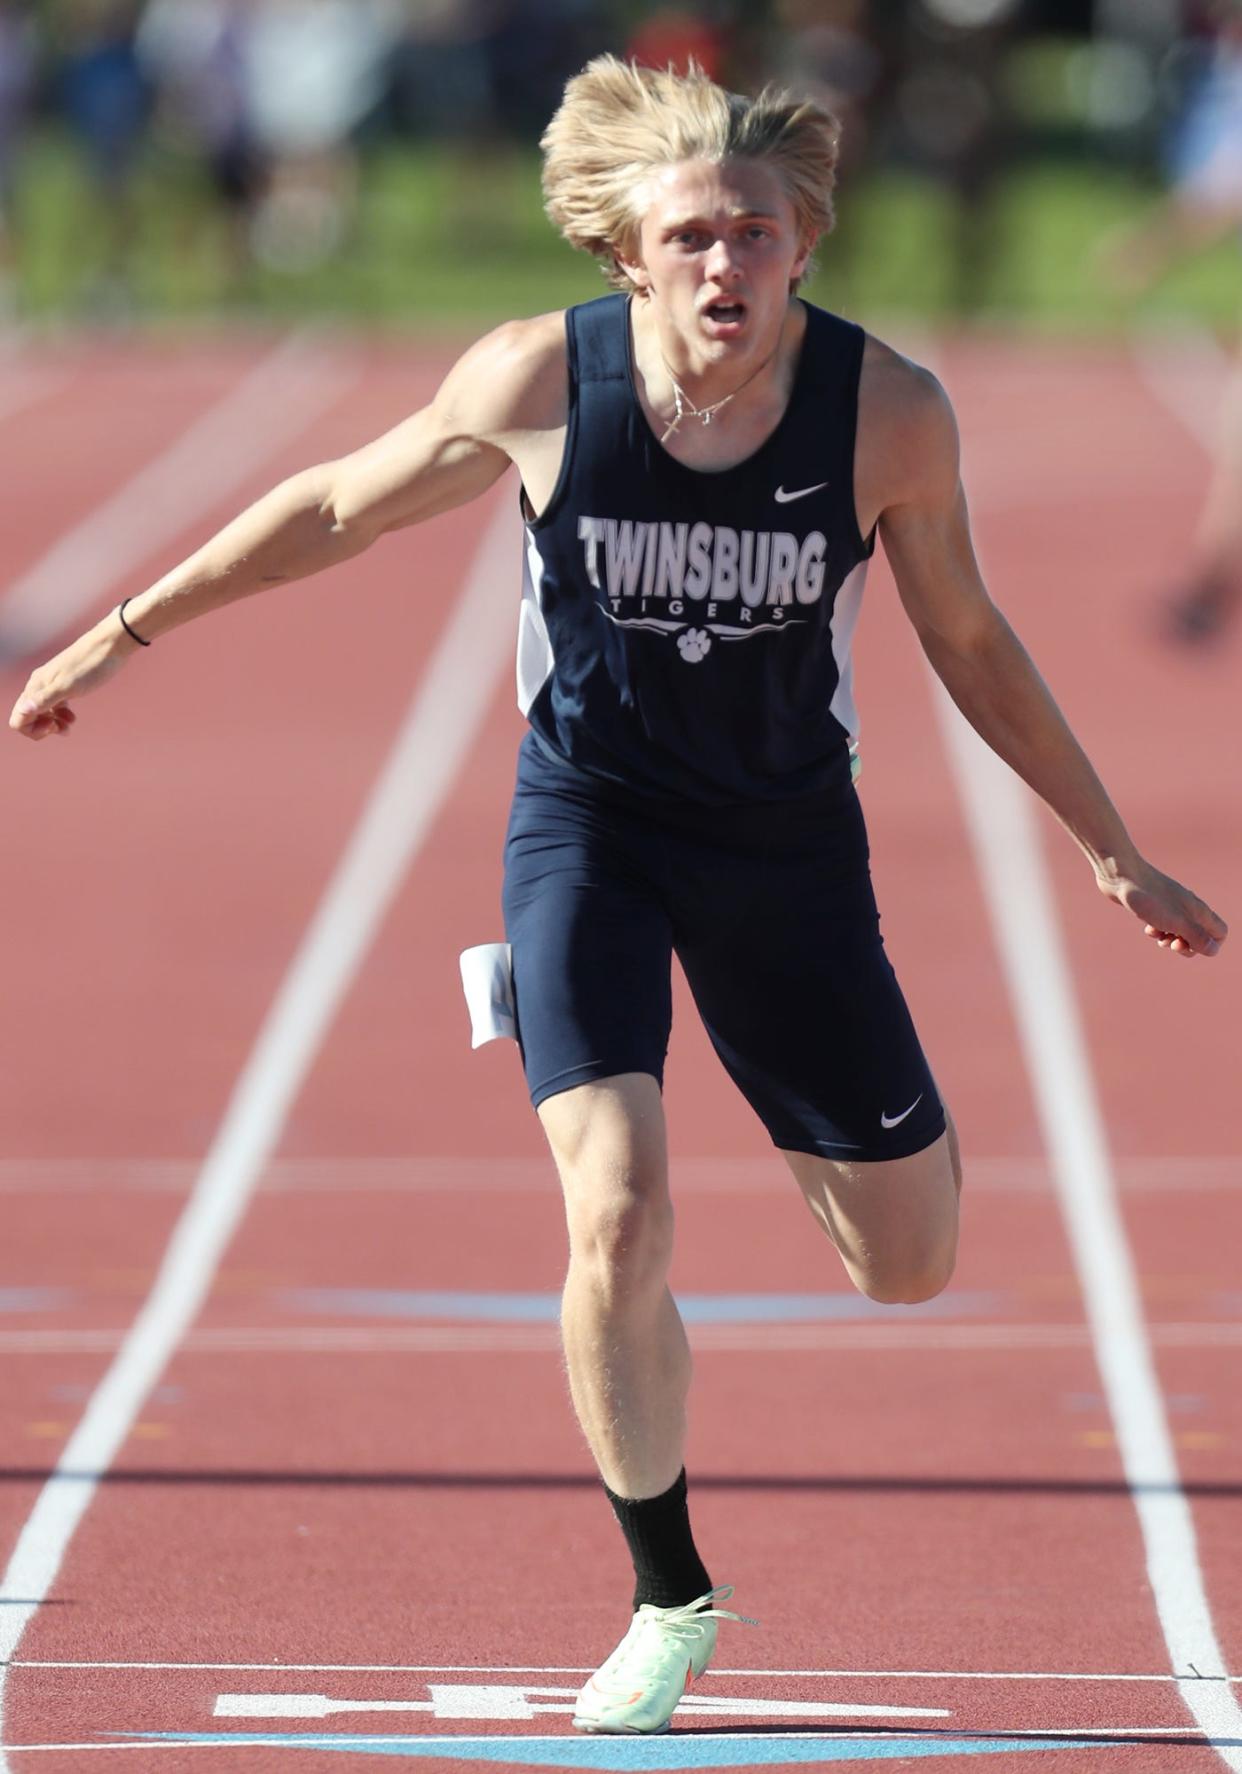 Twinsburg's Logan Doyle crosses the finish line for a second place finish in the boys 400 meter dash at the Div. I state track and field championships at Jesse Owen Stadium in Columbus on Saturday.